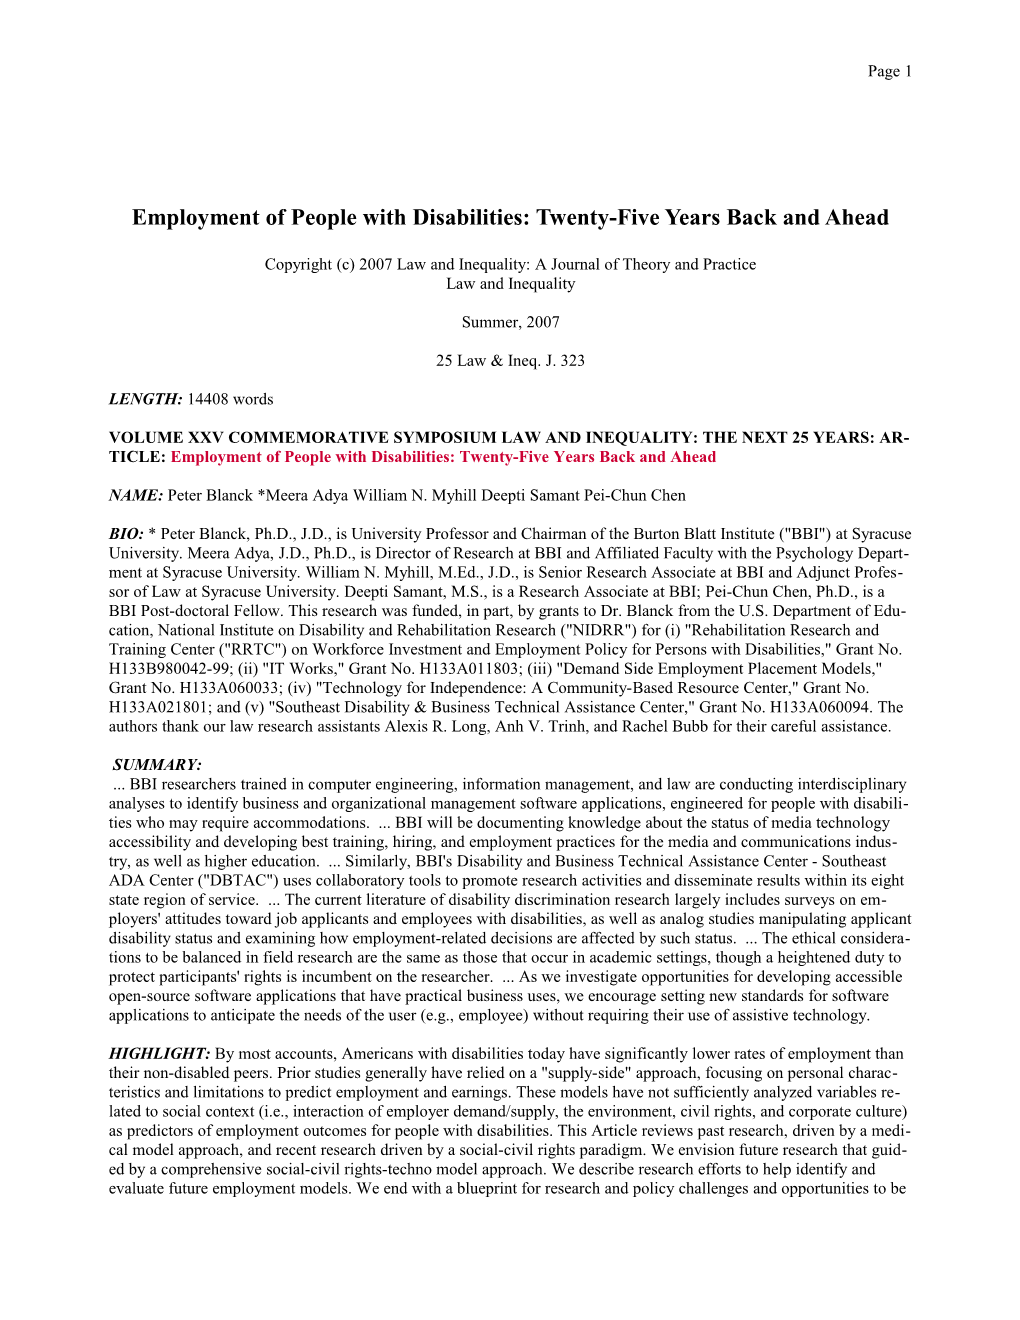 Employment of People with Disabilities: Twenty-Five Years Back and Ahead